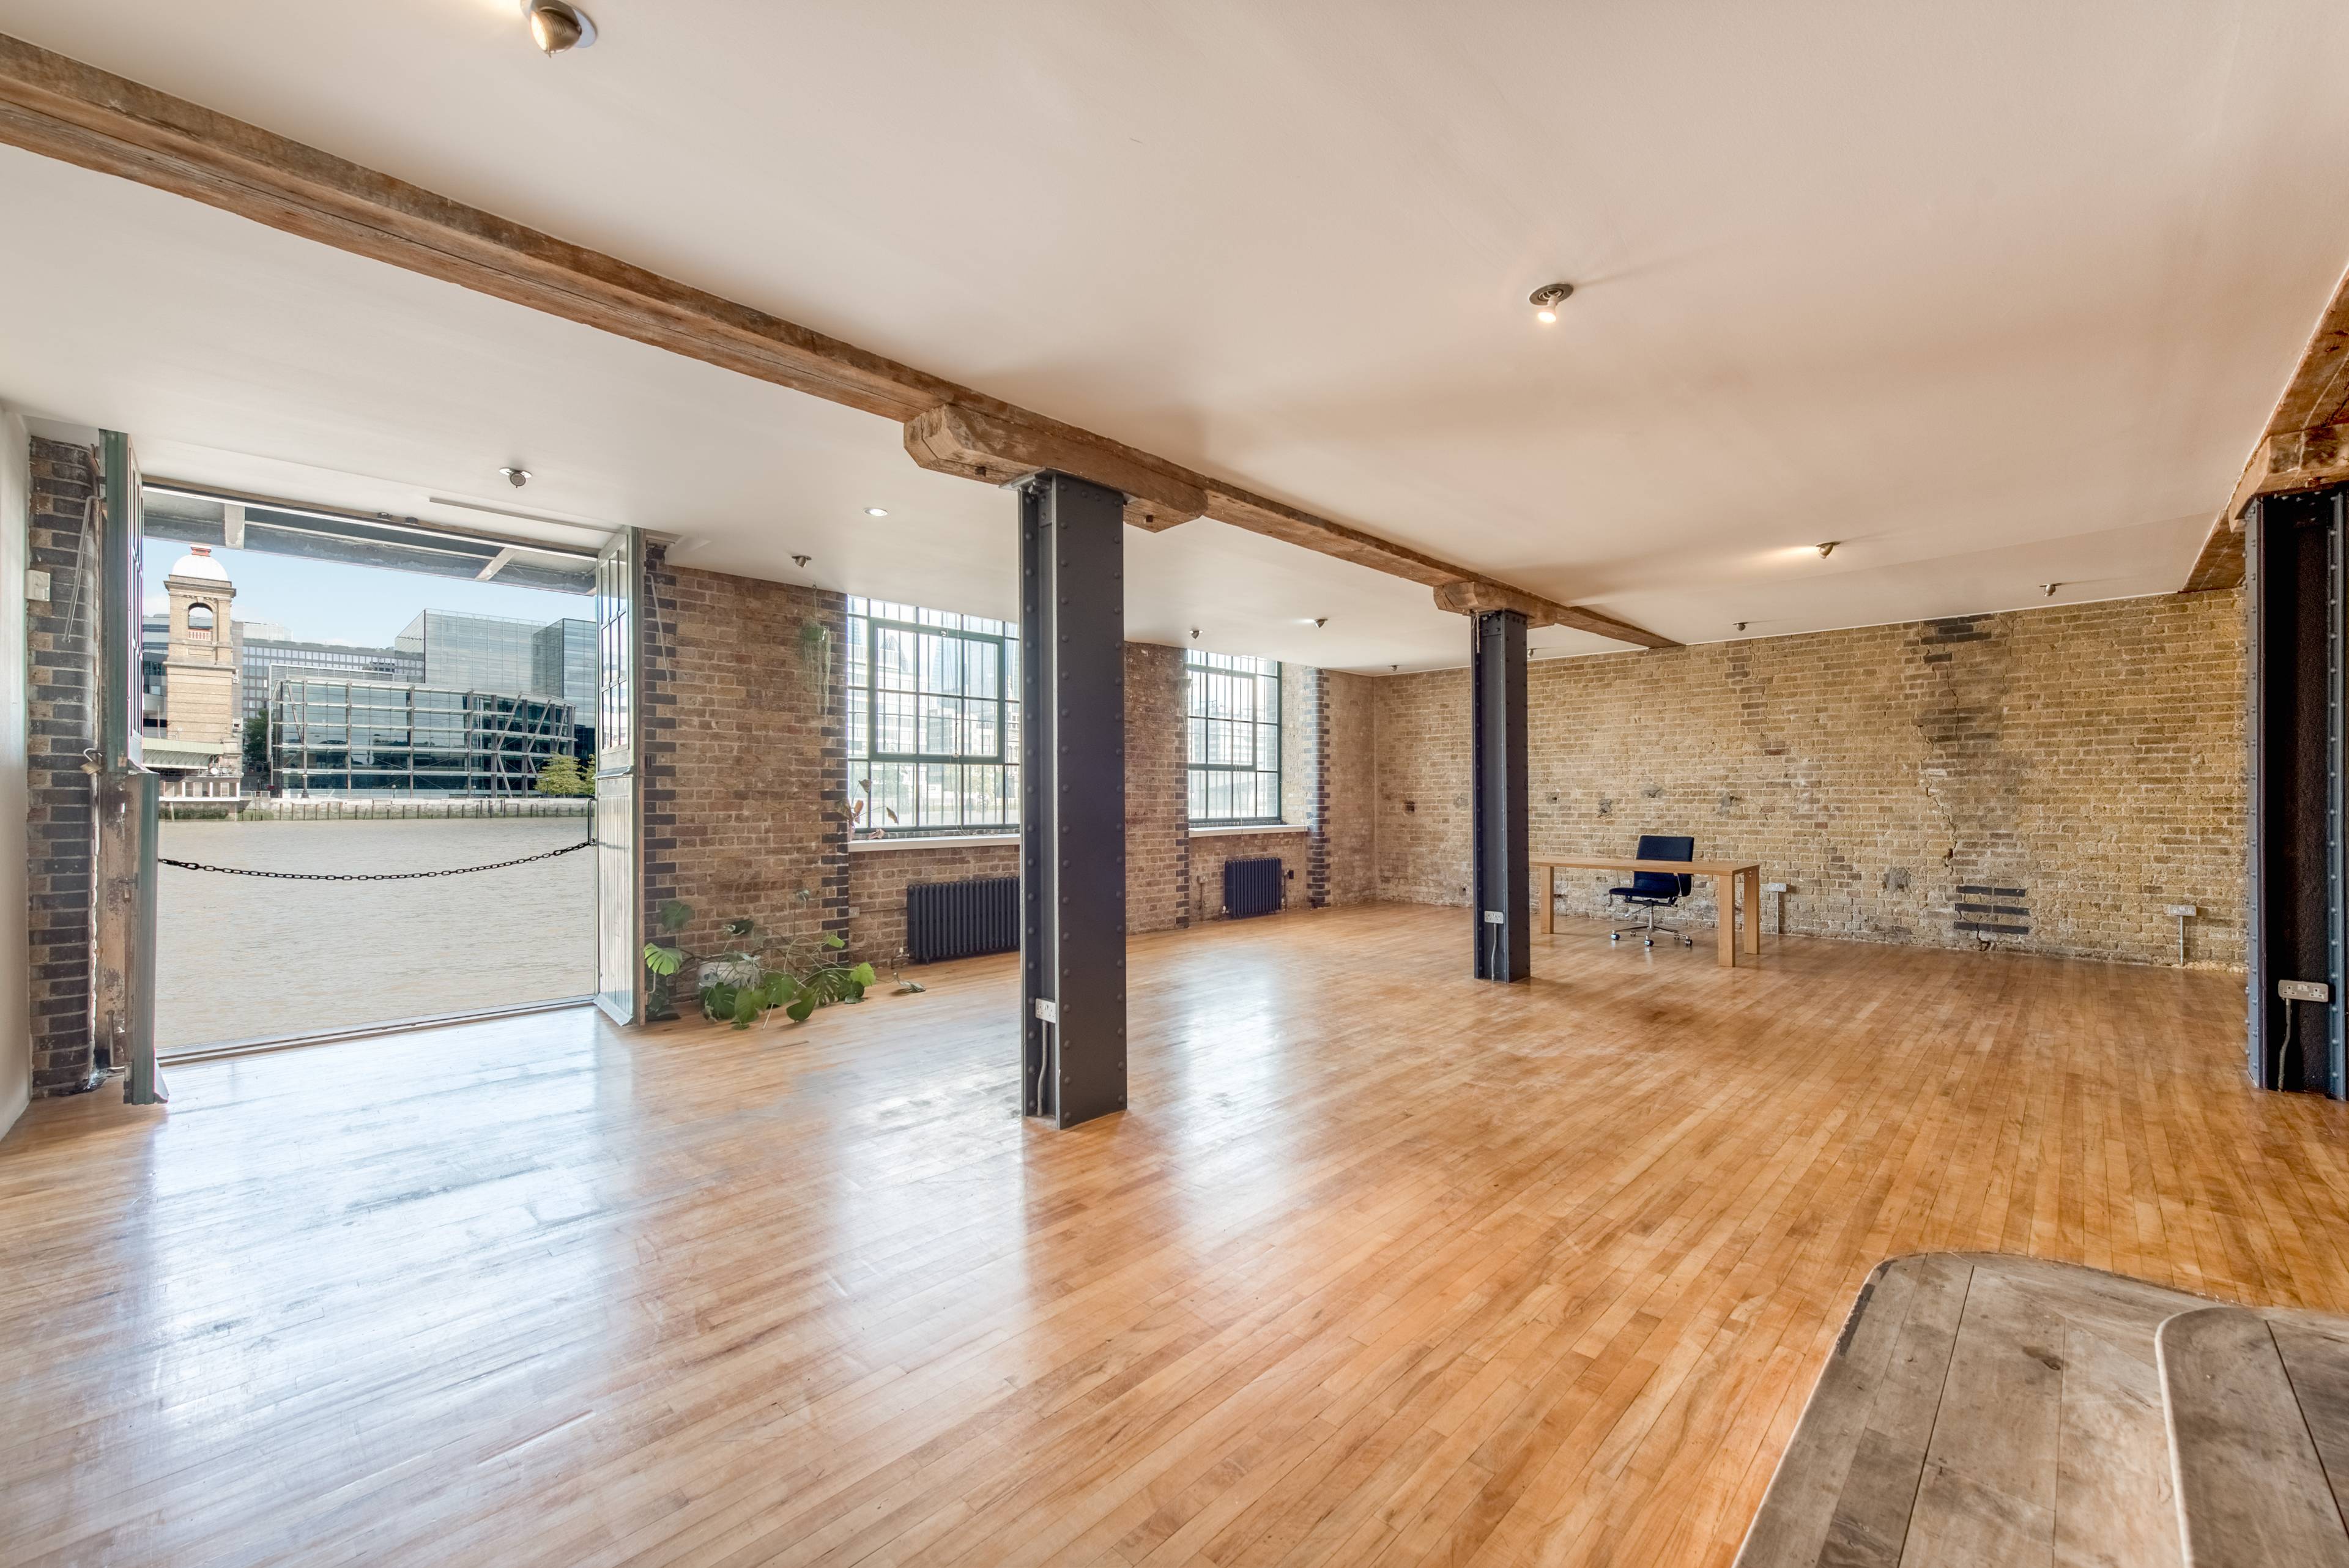 A simply massive riverside loft apartment offering epic lateral space and hard to beat views sitting directly on The River Thames by trendy Borough Market. Clink Street, London Bridge.